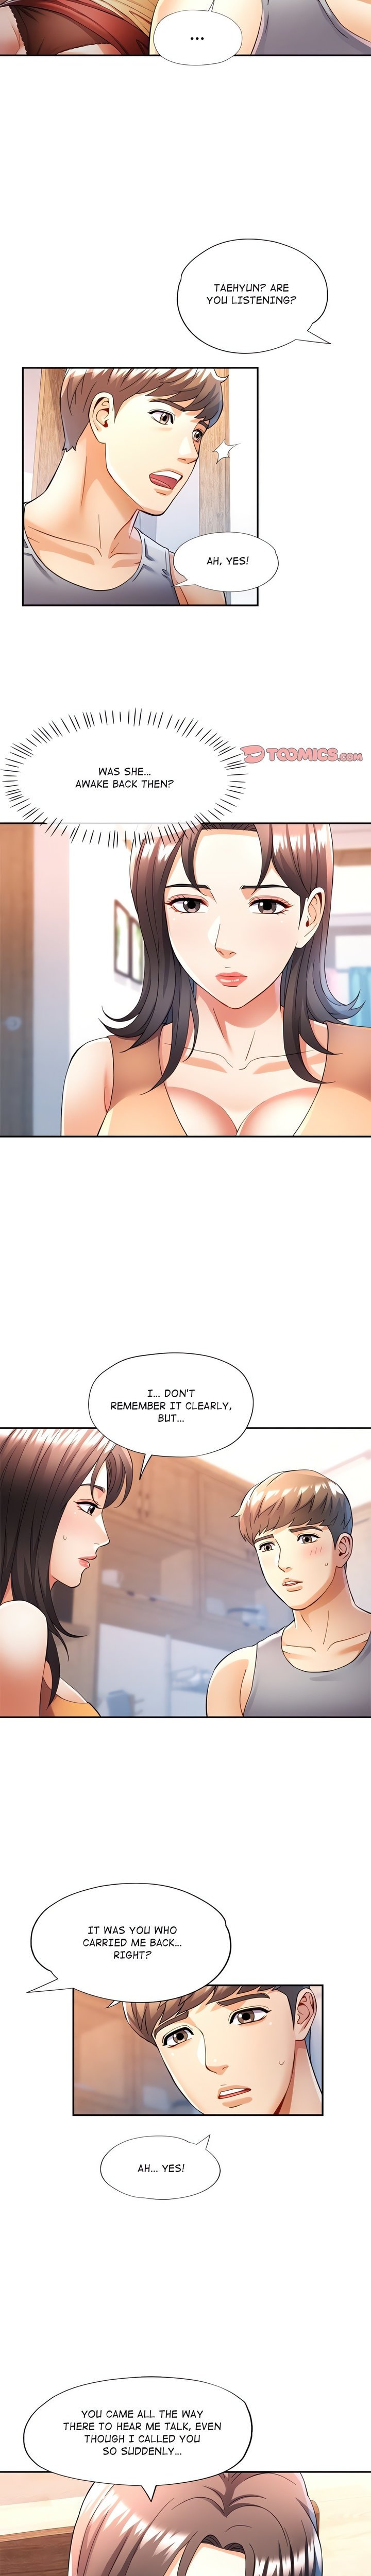 in-her-place-chap-27-5